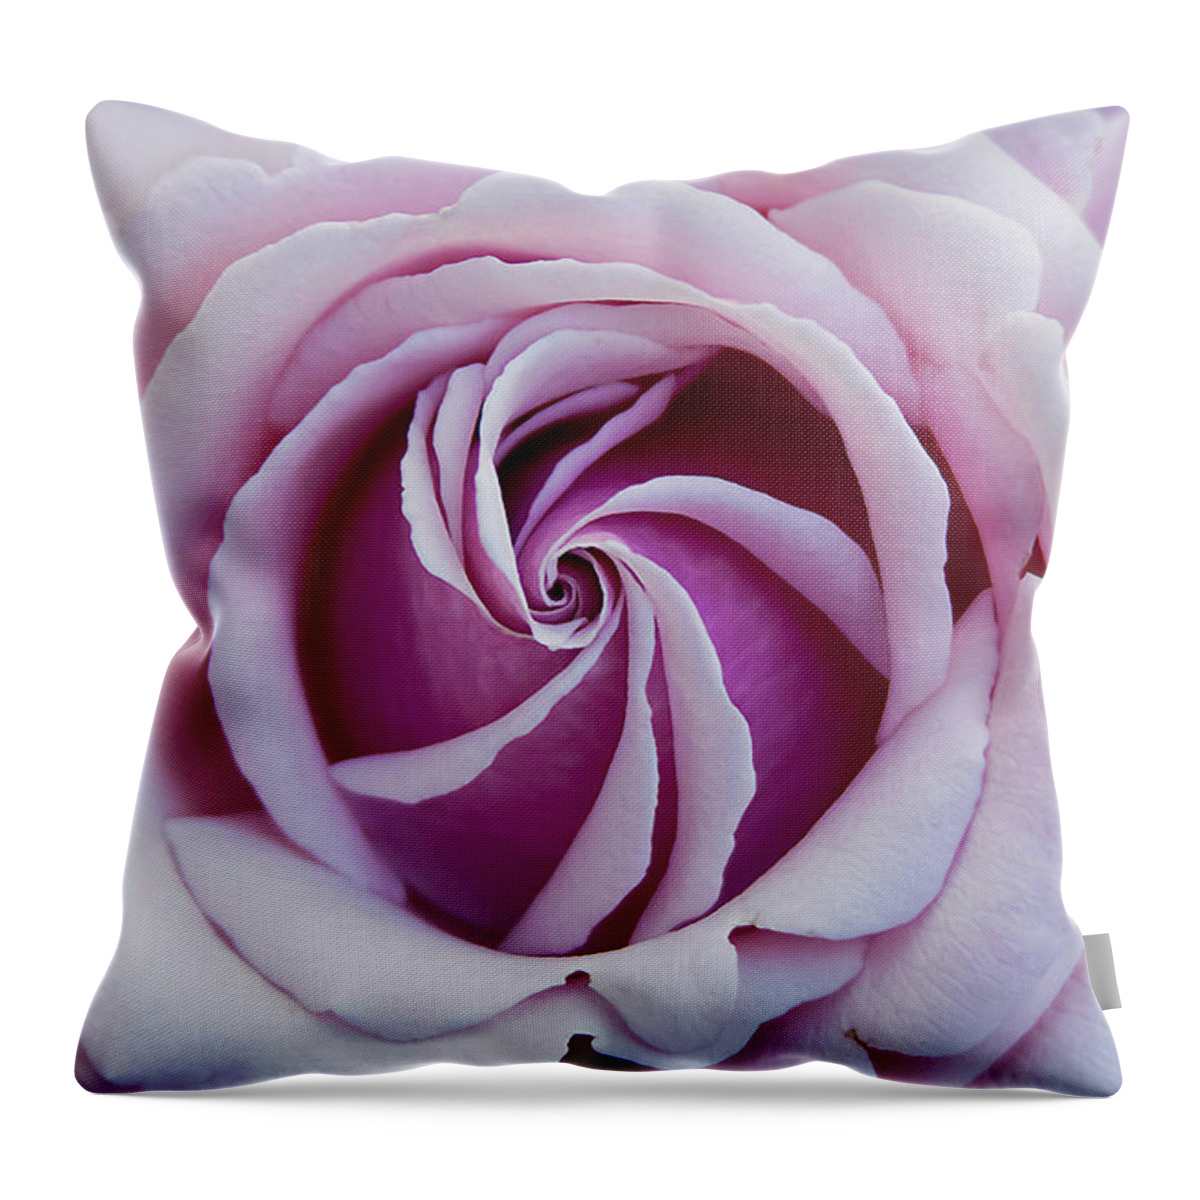 Rose Throw Pillow featuring the photograph Pink Rose Swirl by Vanessa Thomas